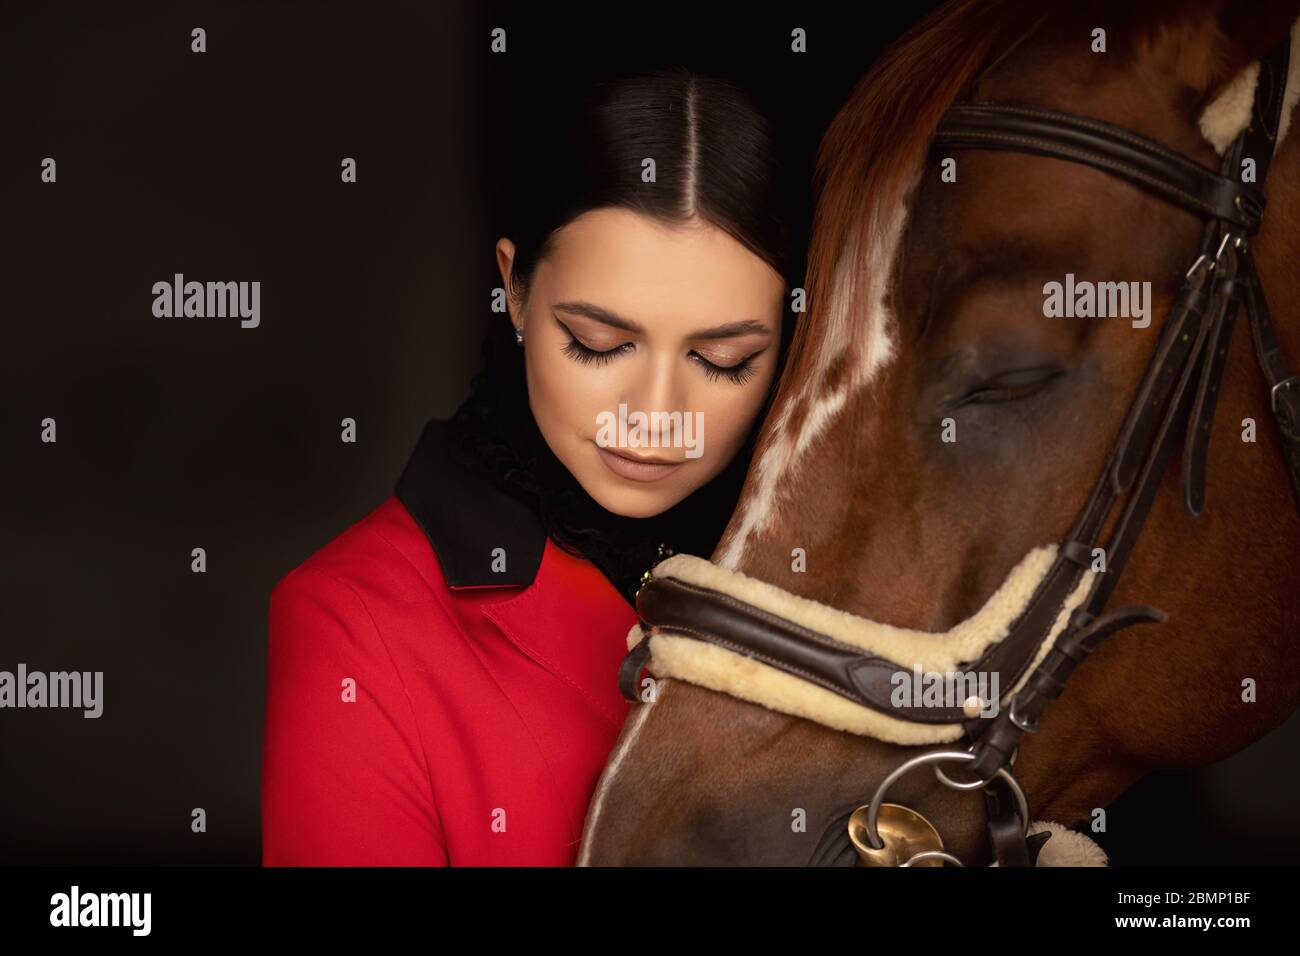 Sensual photo young woman rider and horse, concept of mutual understanding  of girl and animal, antistress therapy Stock Photo - Alamy